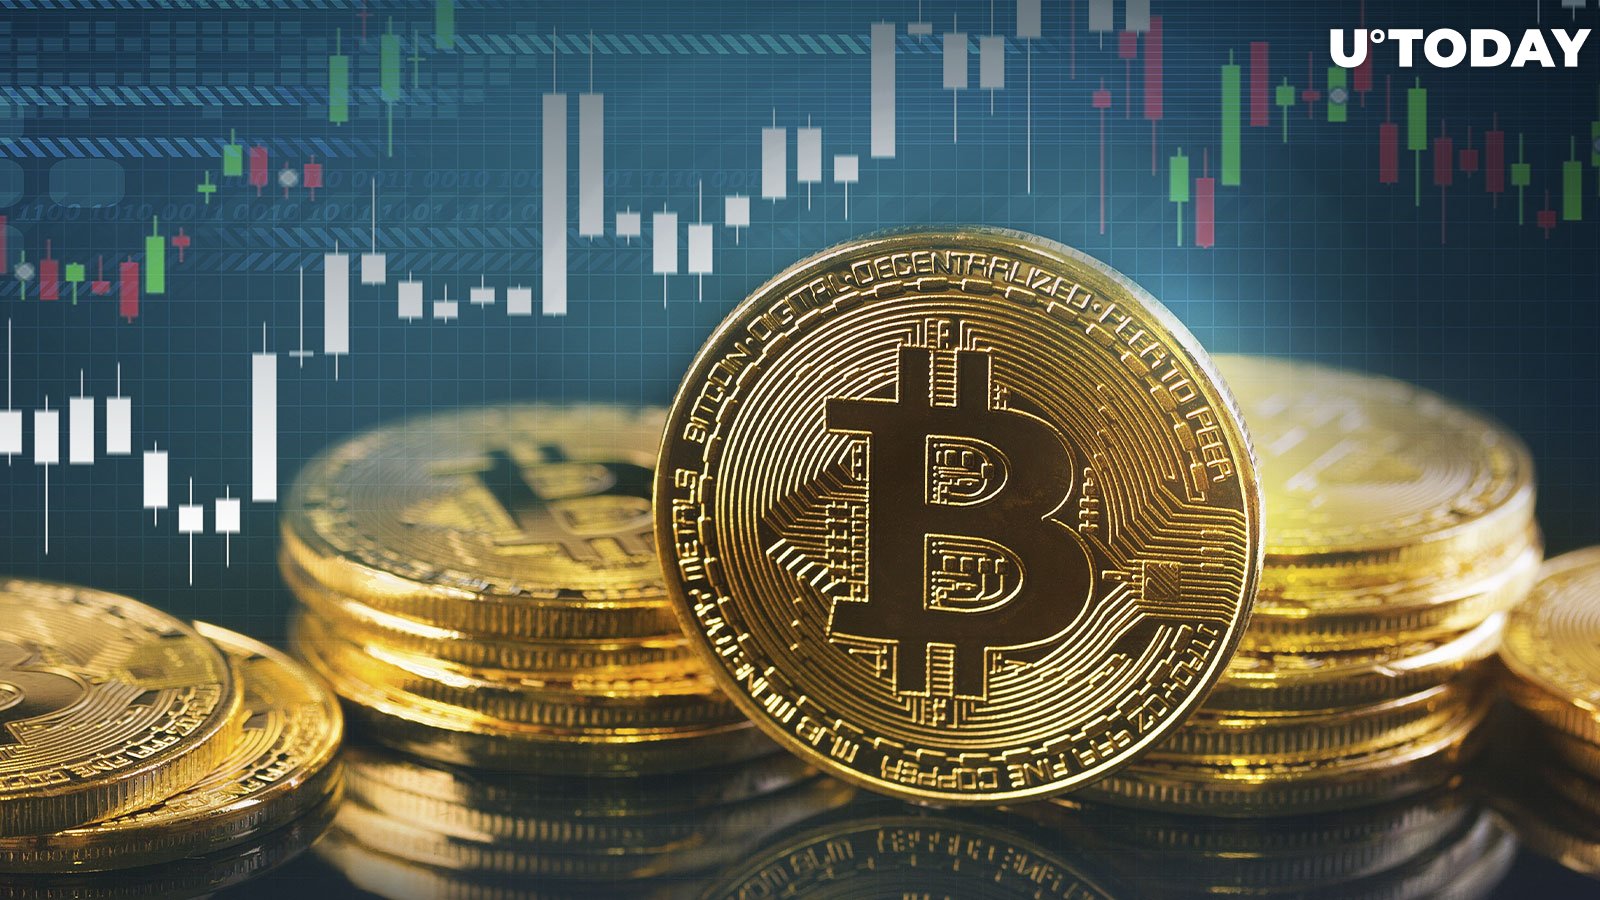 As Bitcoin (BTC) Approaches $29,000, This Professor Warns Rally Might Fizzle Out